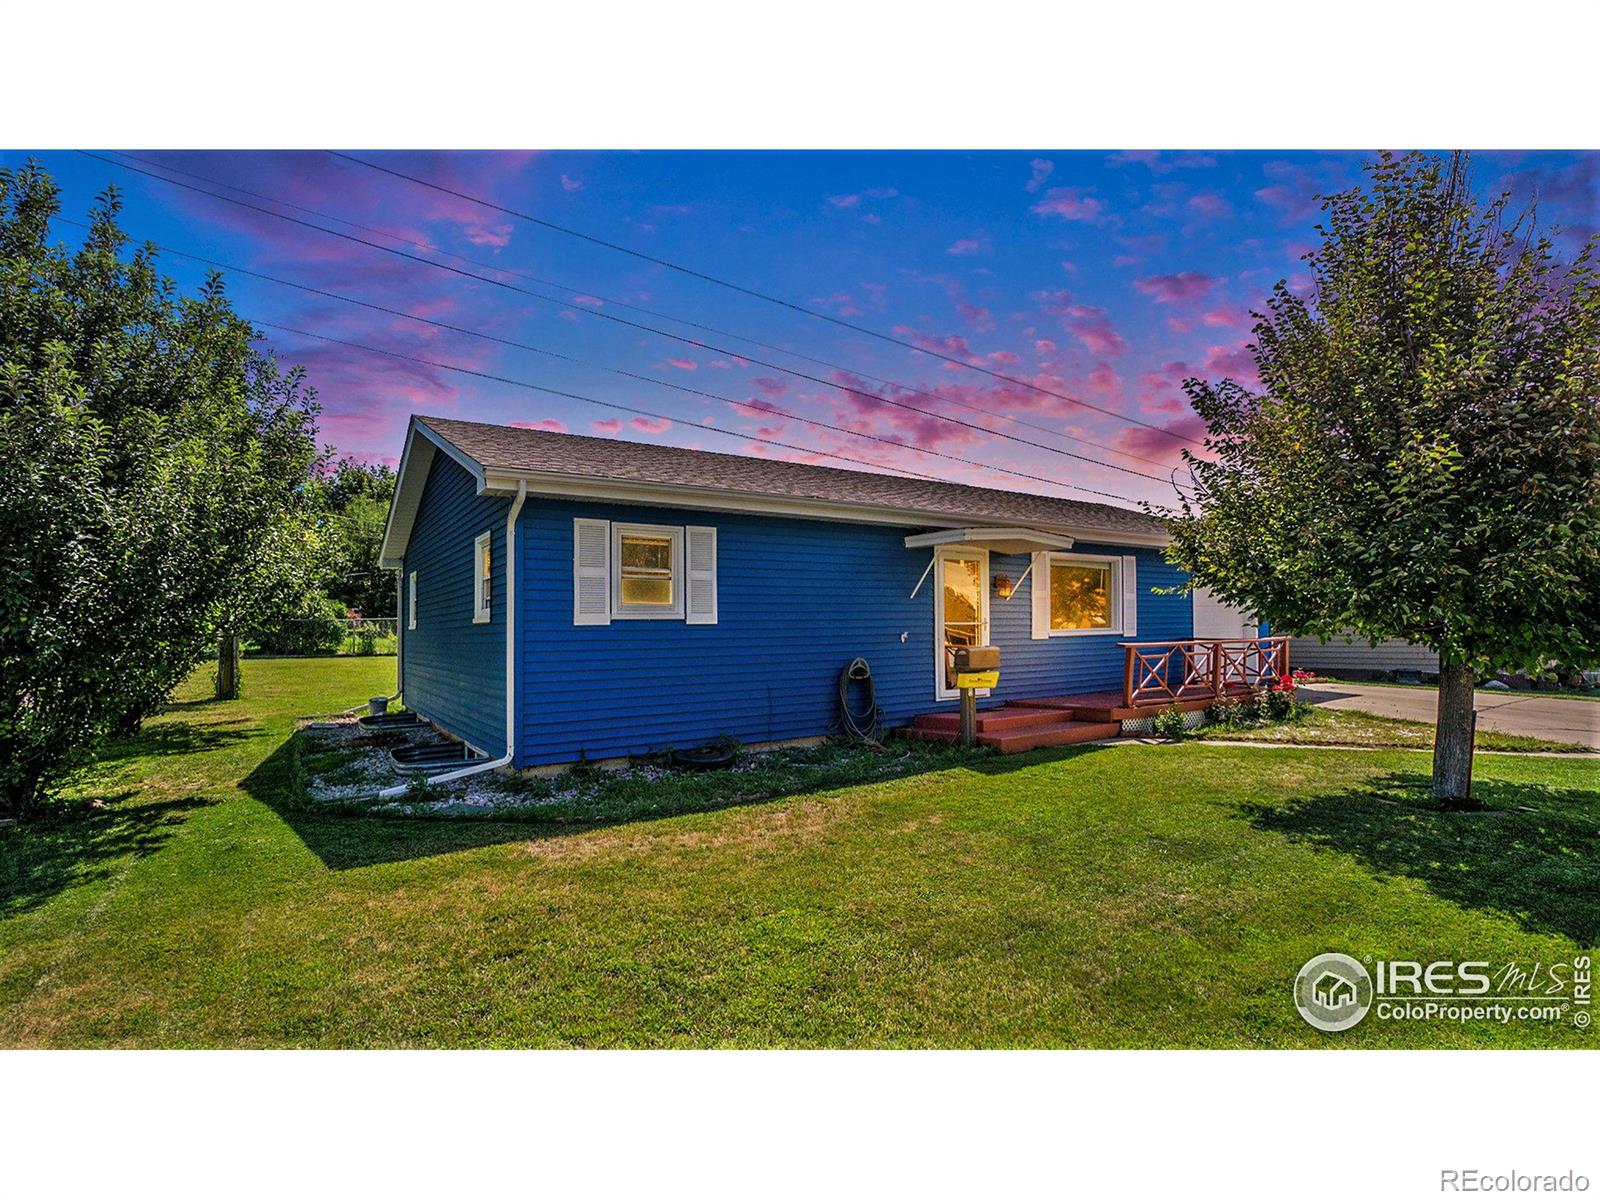 2602 W 12th St Rd, greeley MLS: 456789994717 Beds: 4 Baths: 2 Price: $349,900